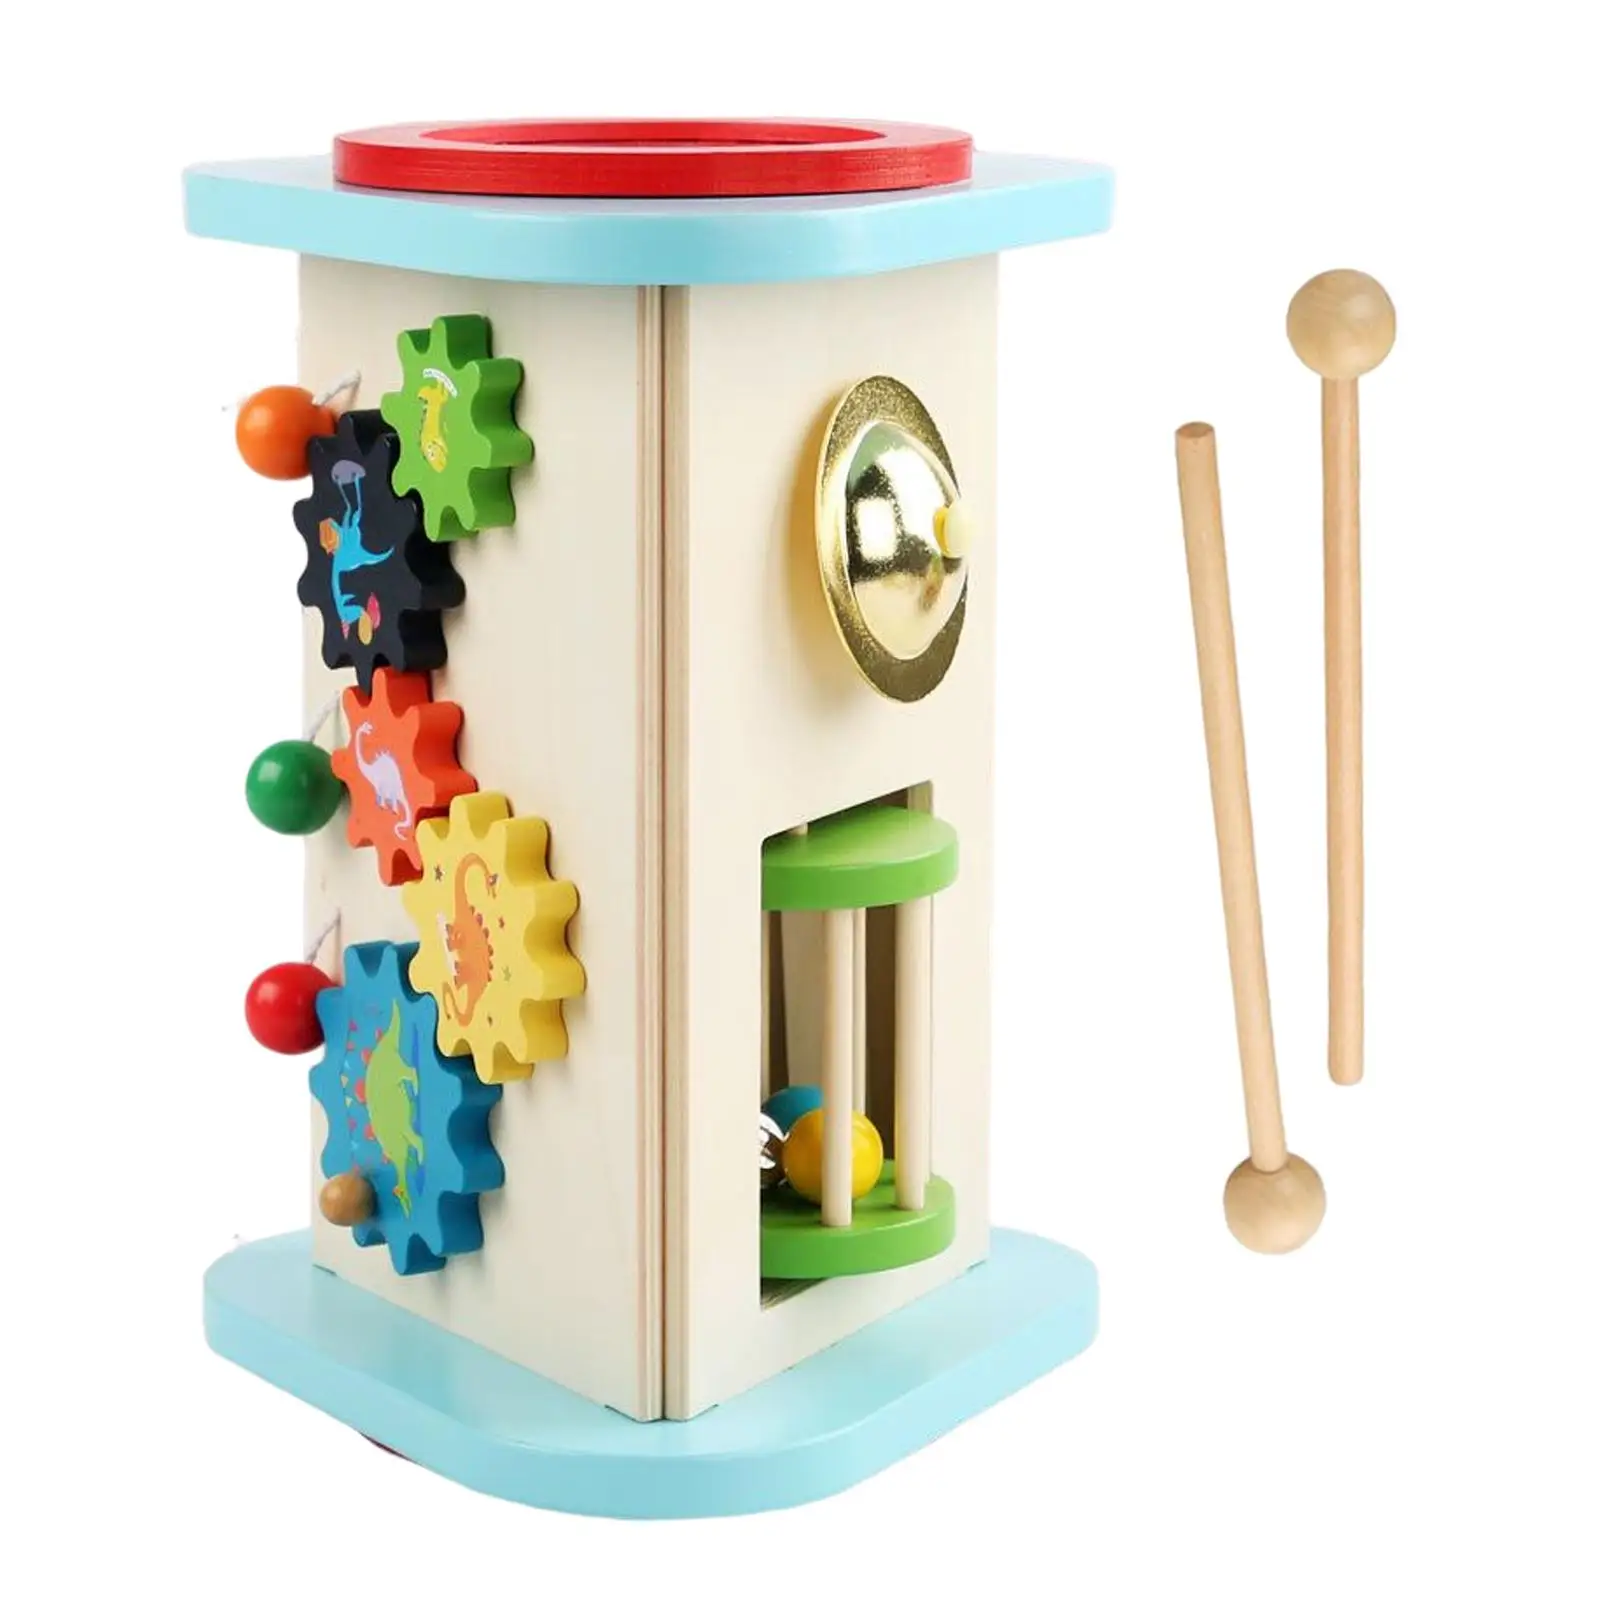 5 in 1 Kids Musical Instrument Toy Durable Colorful for Children Toddlers